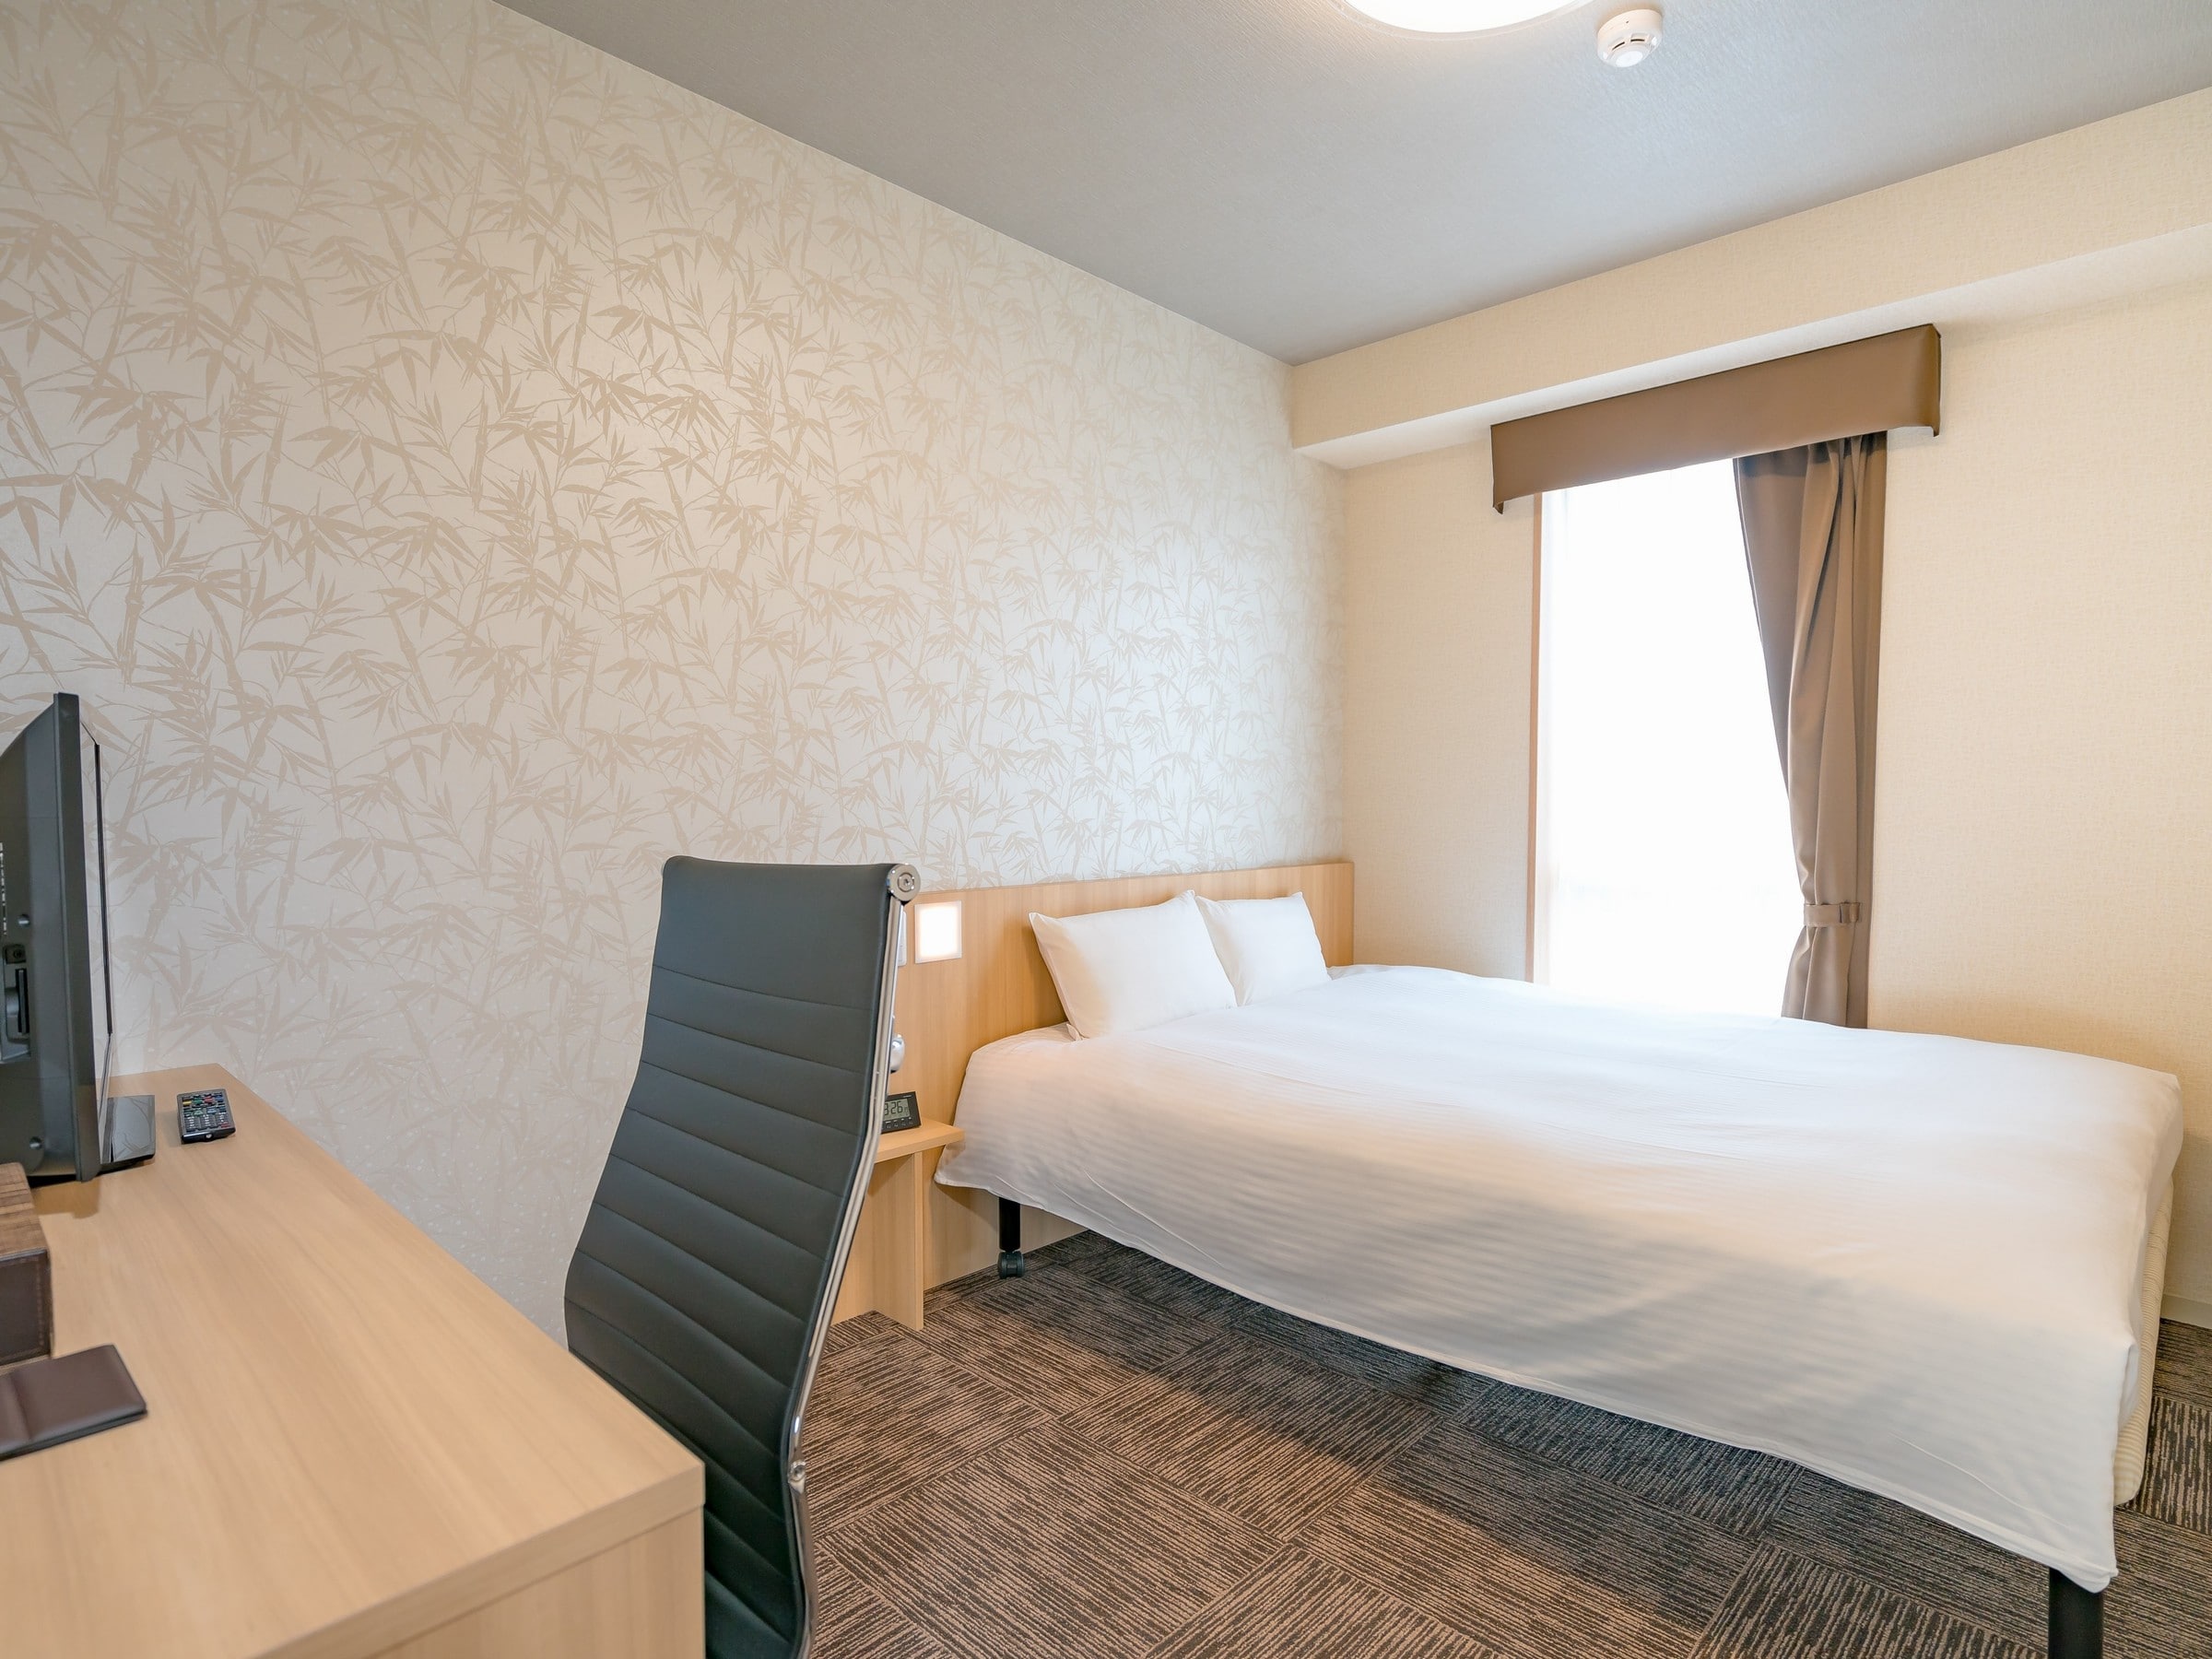 [Standard Double] A double room that pursues comfort while being compact.